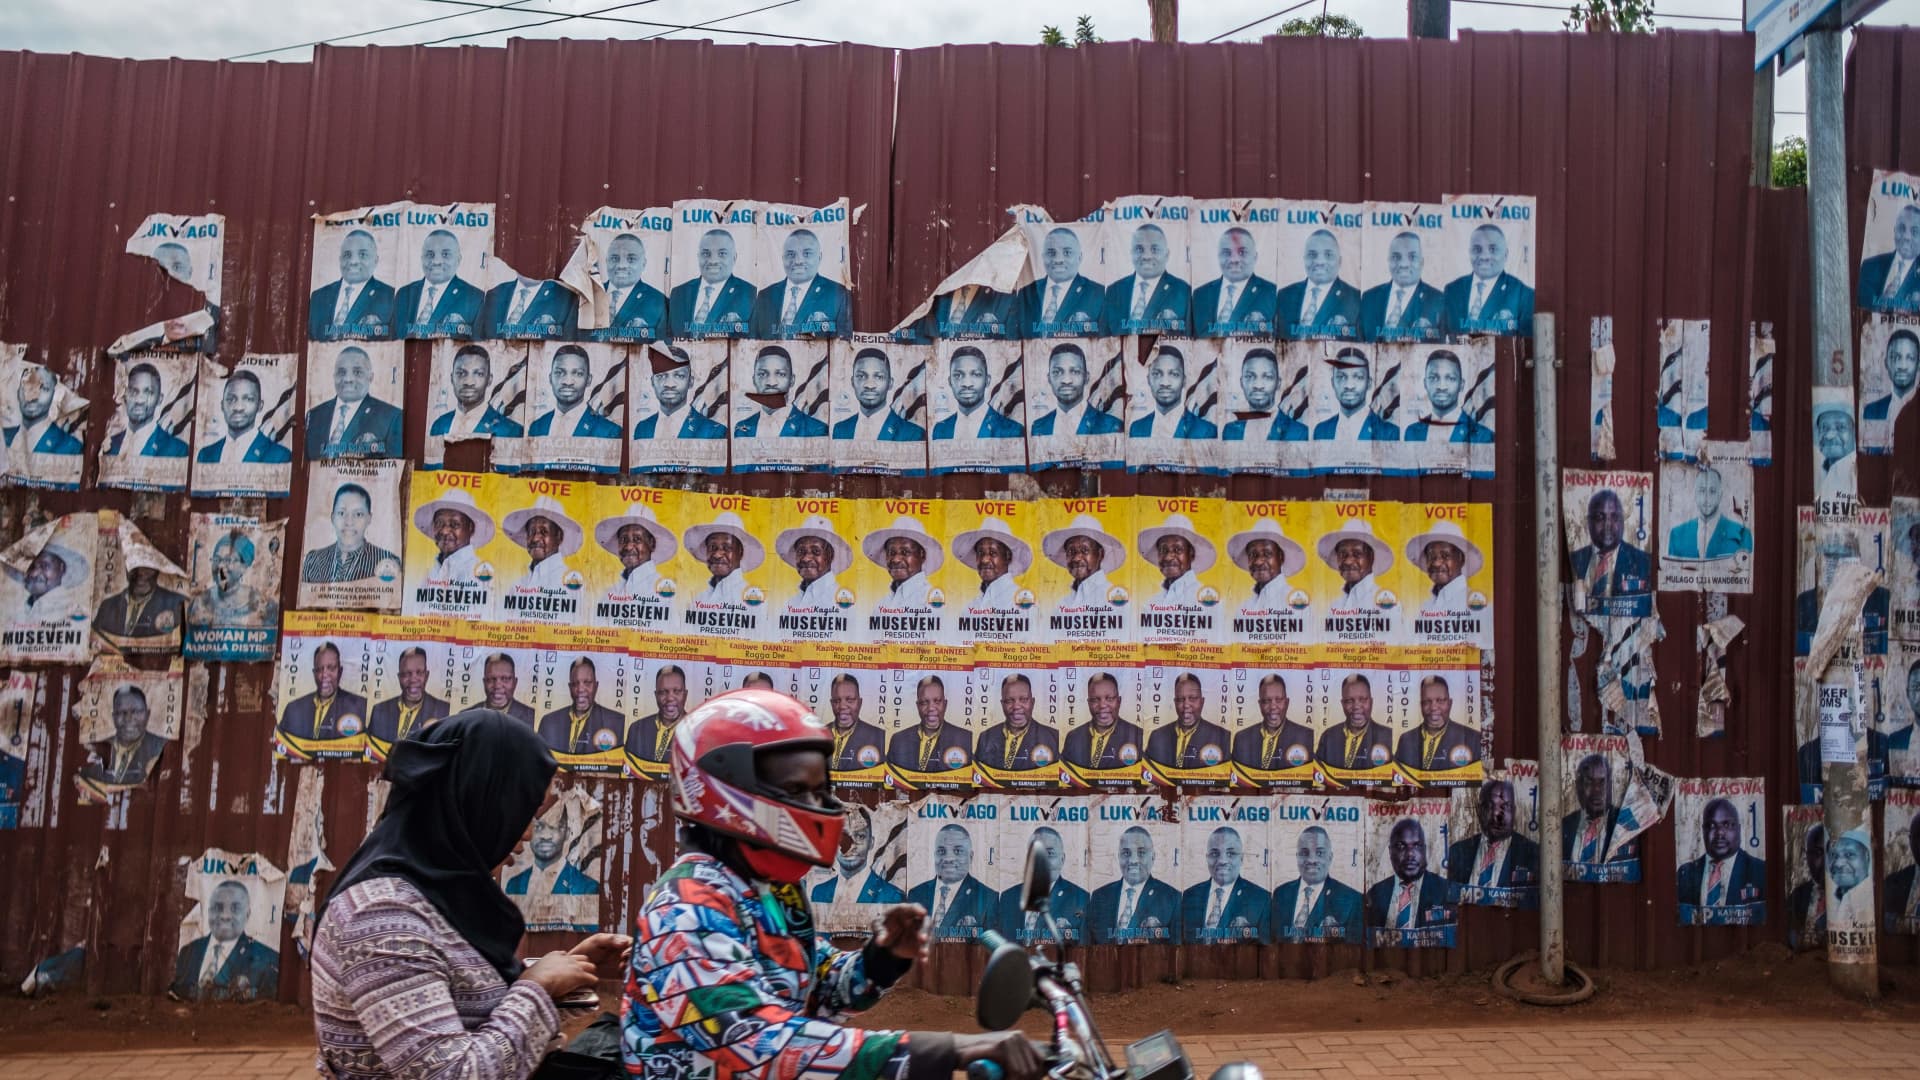 Posters of the two most popular candidates for Uganda's Presidential election, incumbent President Yoweri Museveni (yellow) and Robert Kyagulanyi, aka Bobi Wine, the pop star-turned-opposition leader, are seen along a street in Kampala, Uganda, on January 6, 2021.